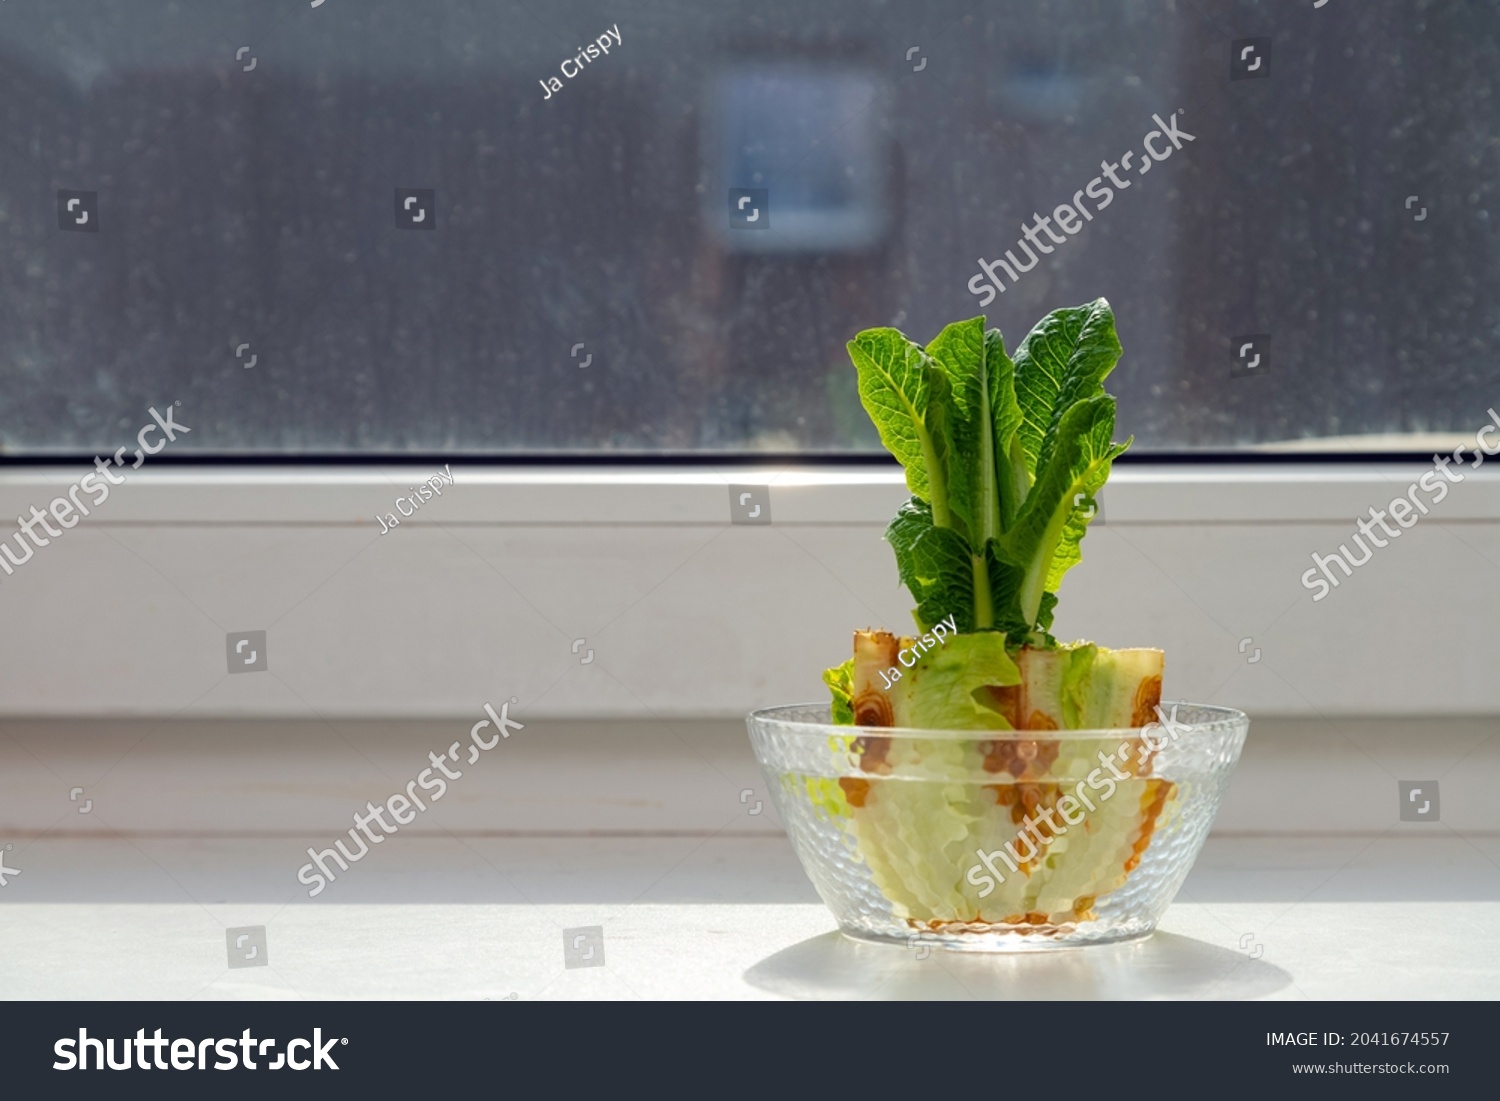 Regrowing chinese cabbage in a glass bowl on a windowsill. Using vegetable scraps to grow organic vegetables at home. #2041674557